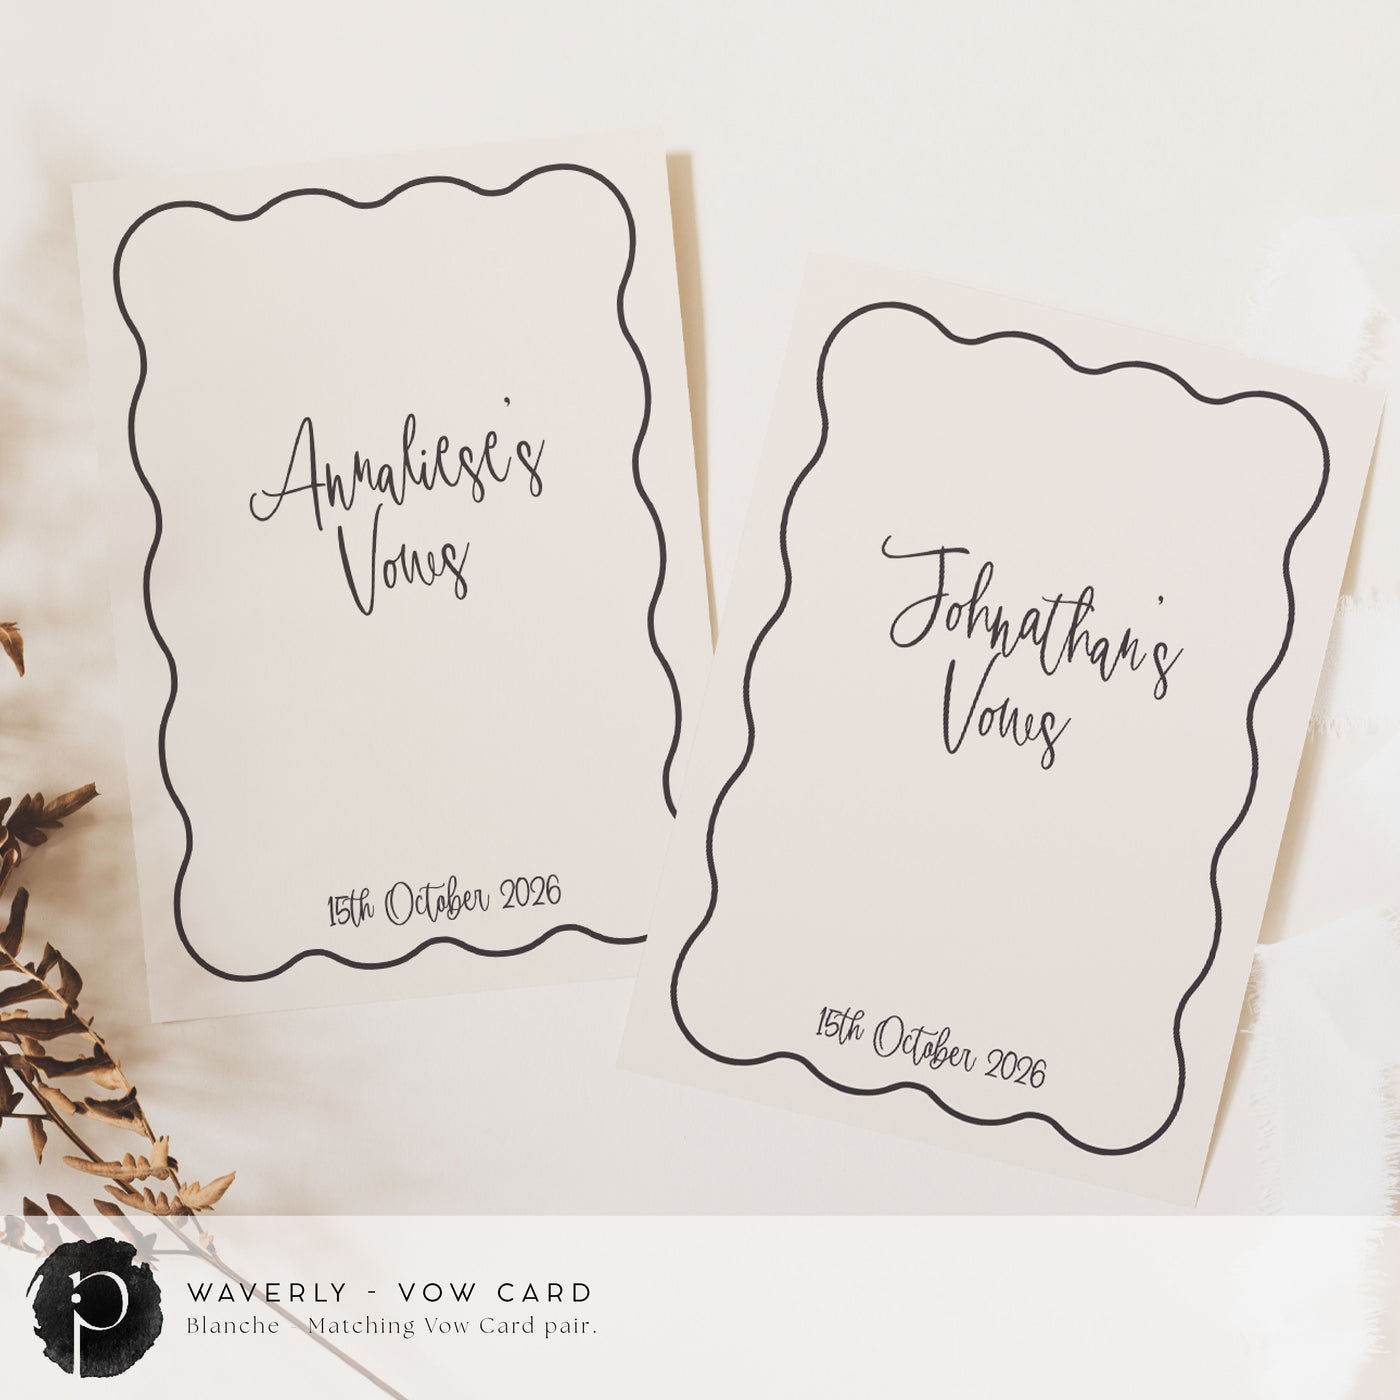 A pair of vow cards to write your wedding vows on in a modern retro wedding theme with charcoal writing on a neutral nude taupe background